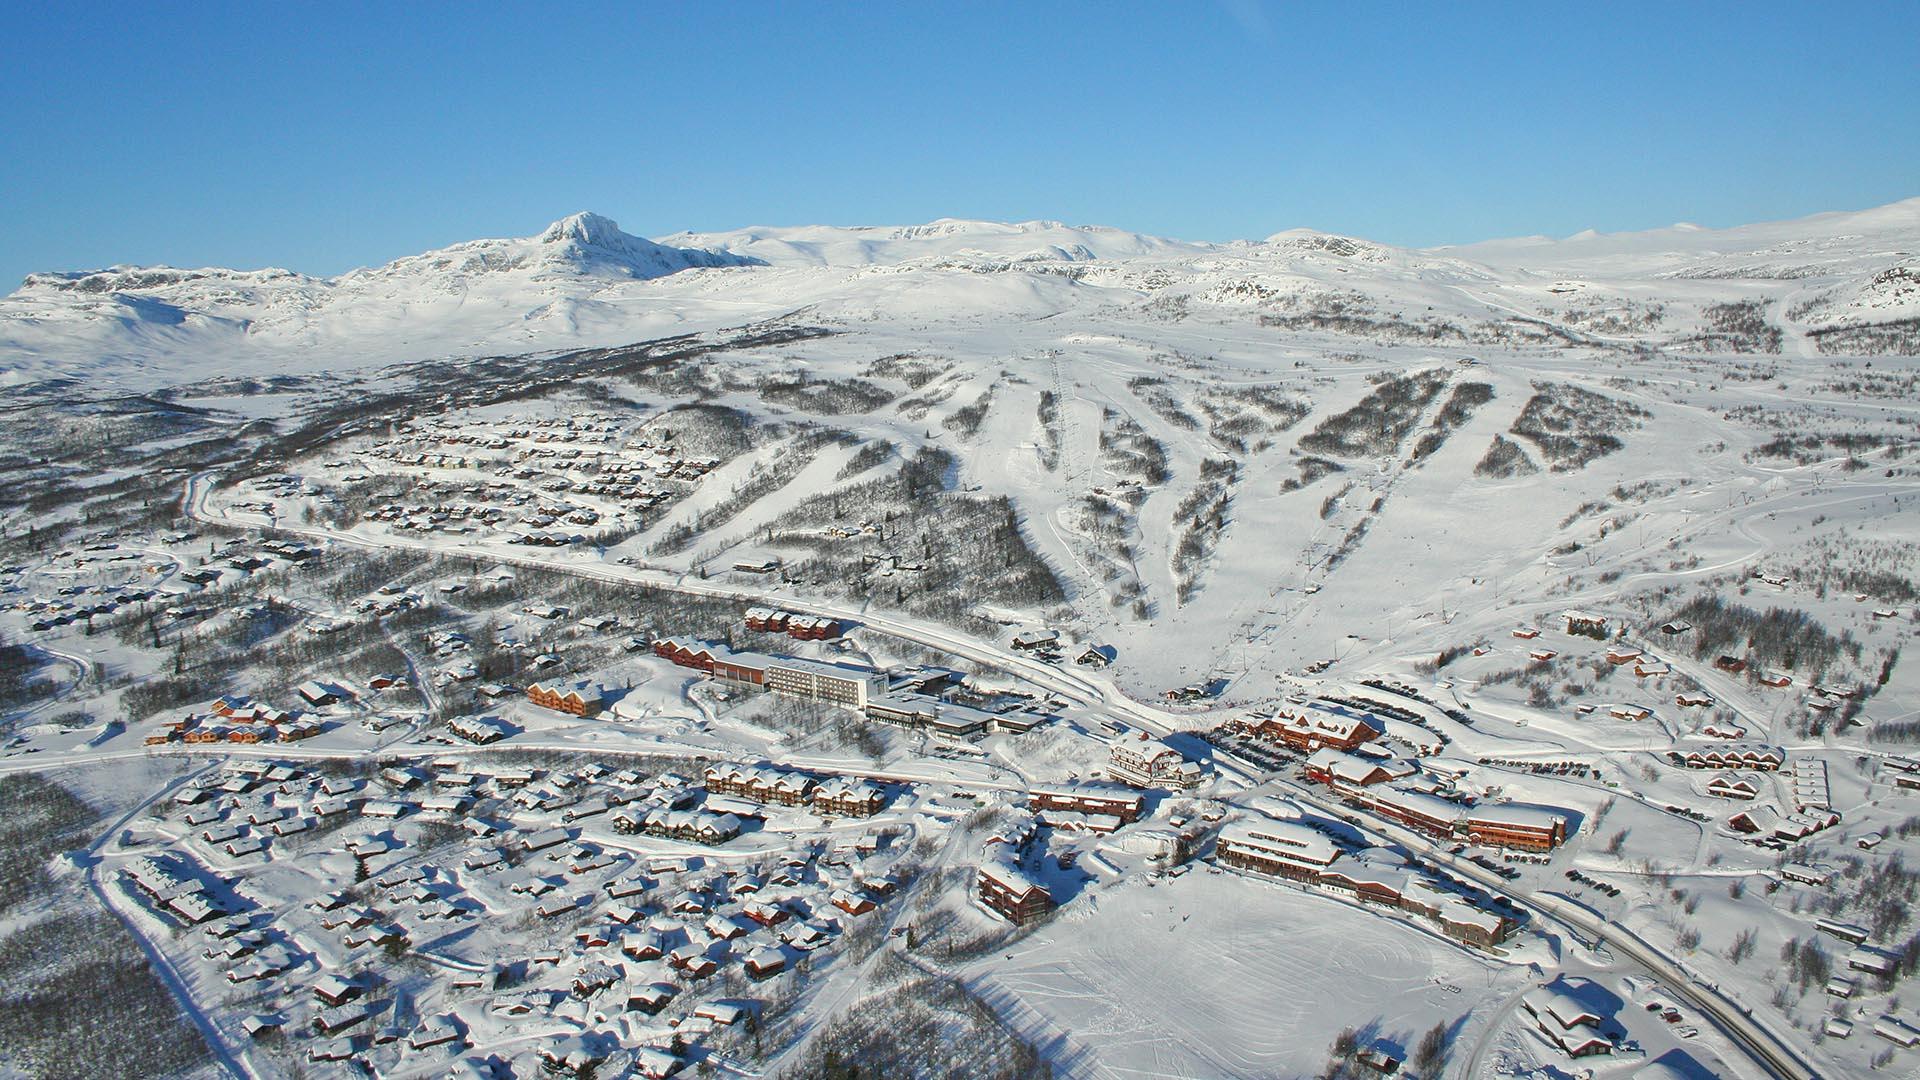 Aerial winter photo of a mountain village with alpine slopes and mountains in the background